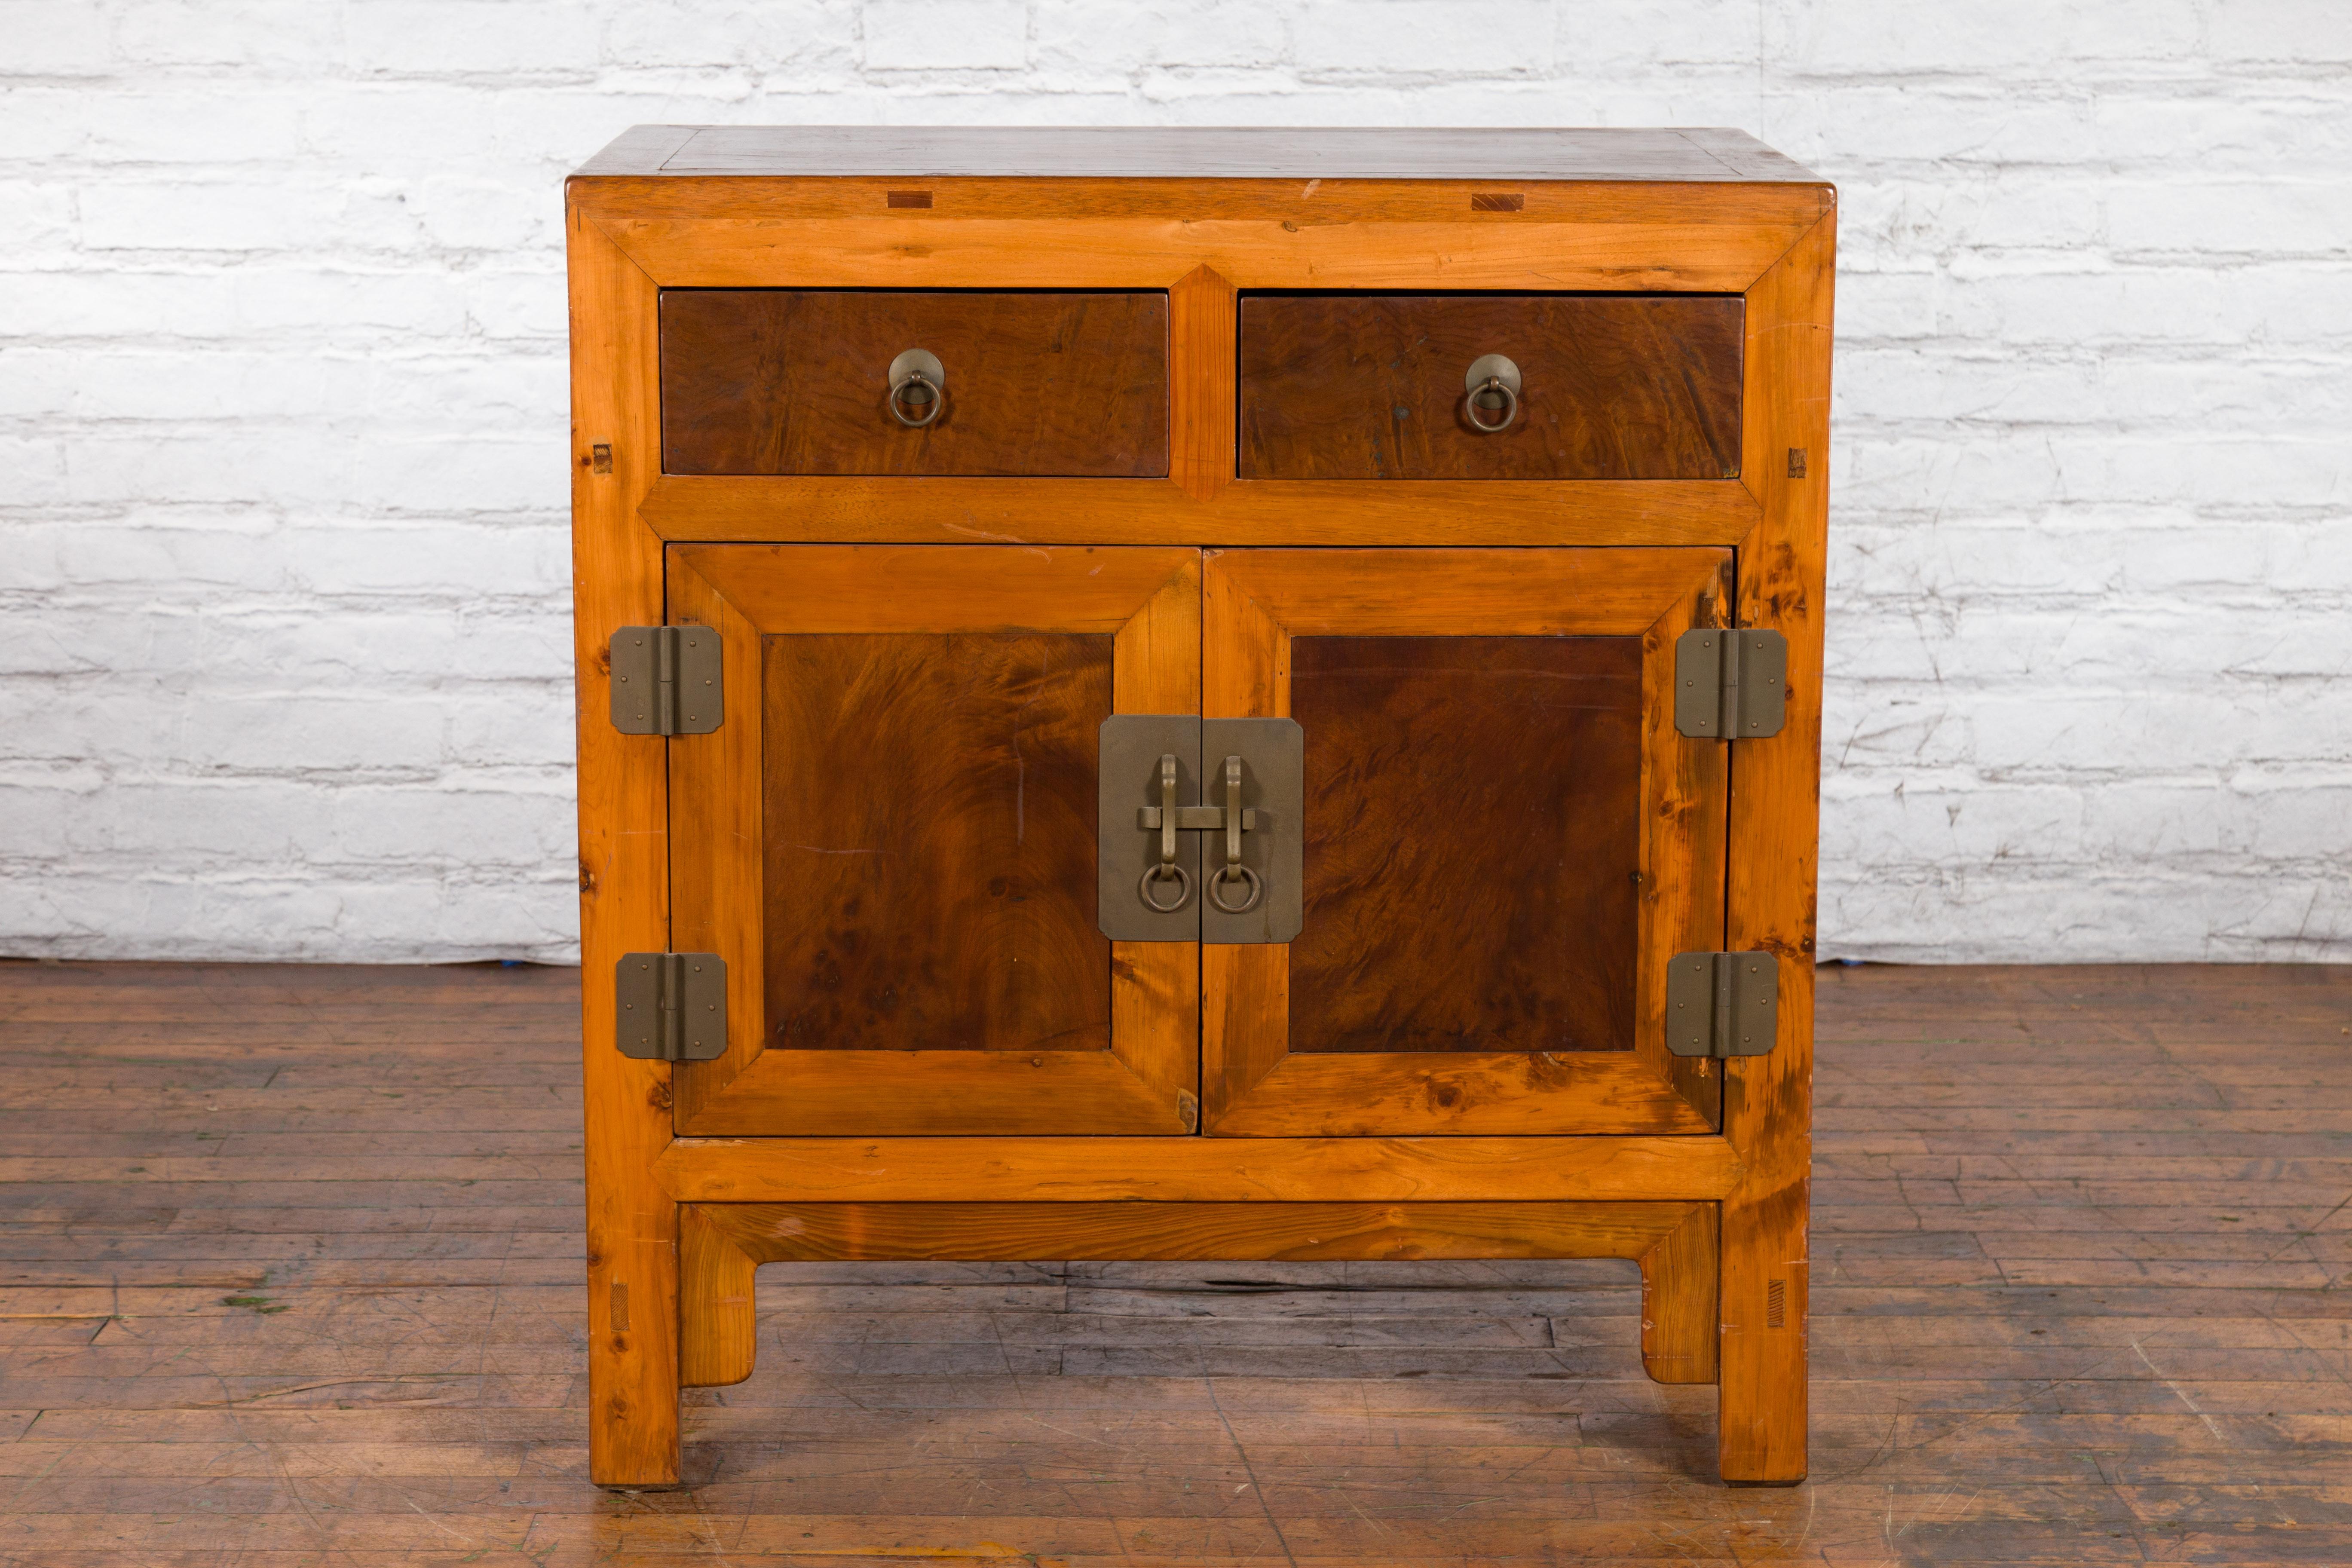 An antique Chinese two-toned elm and burlwood side cabinet from the early 20th century, with two drawers and doors. Created in China during the early years of the 20th century, this side cabinet features a linear silhouette perfectly complimented by